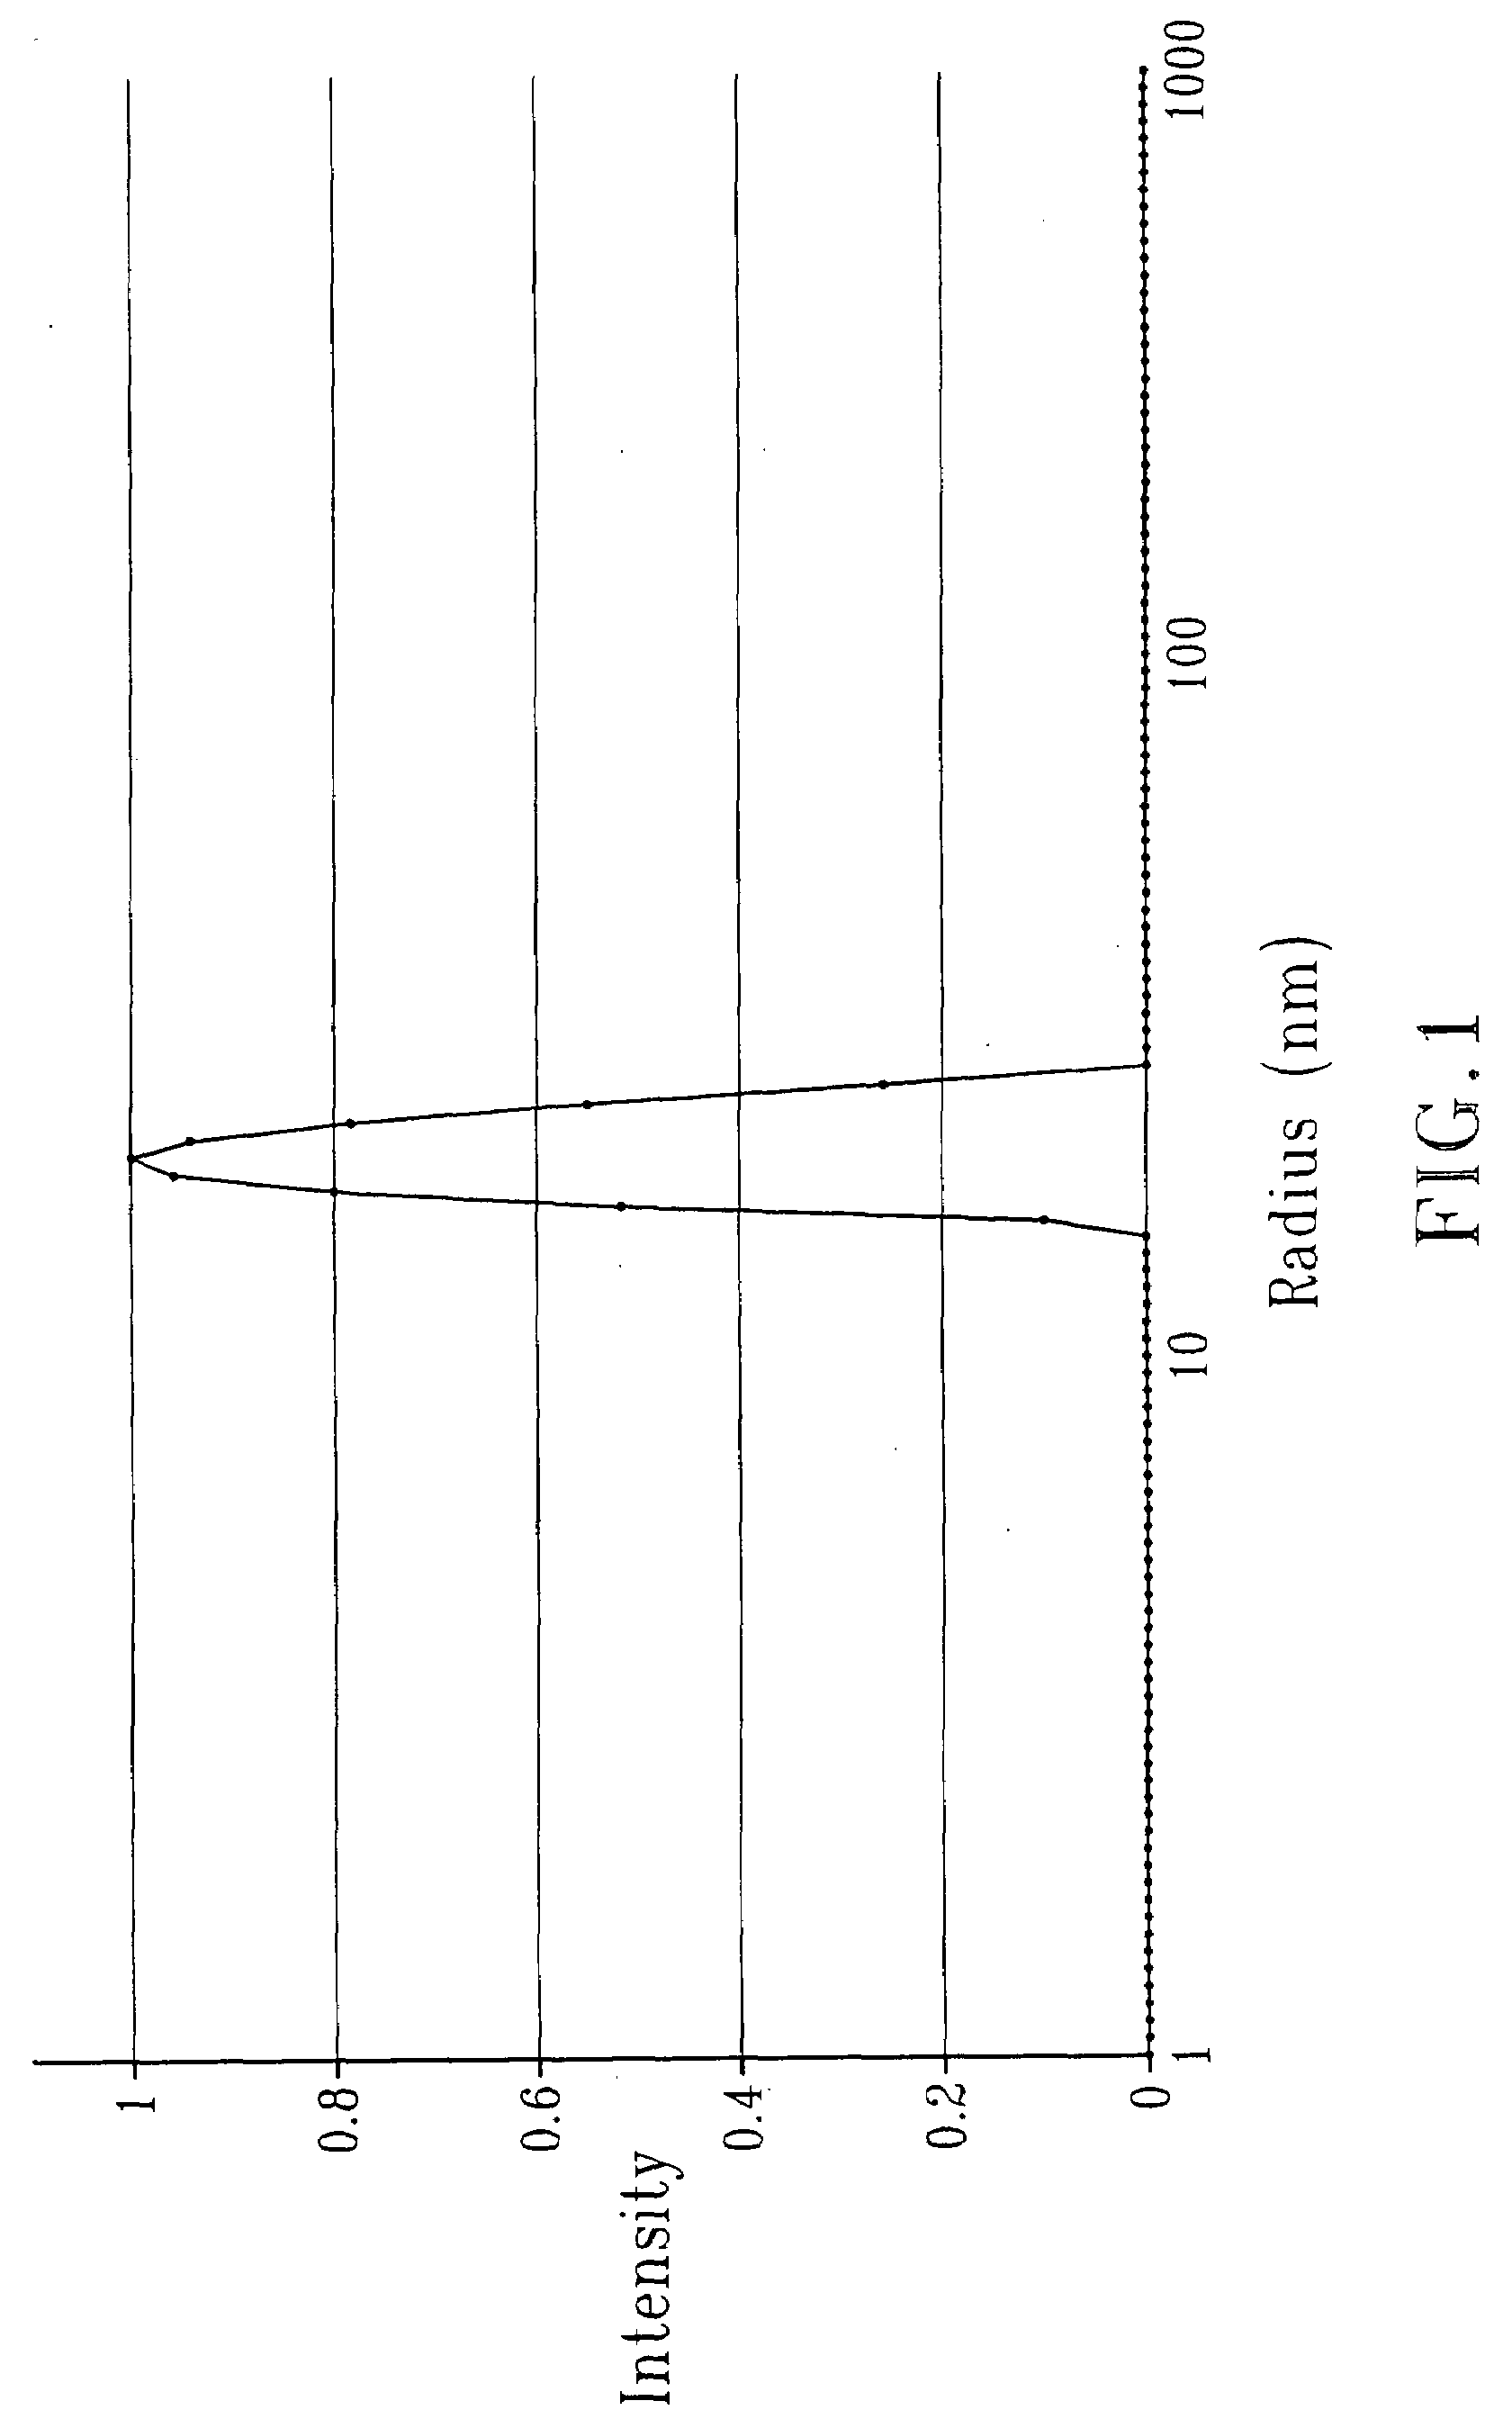 Method of producing finely divided oil-in-water emulsions